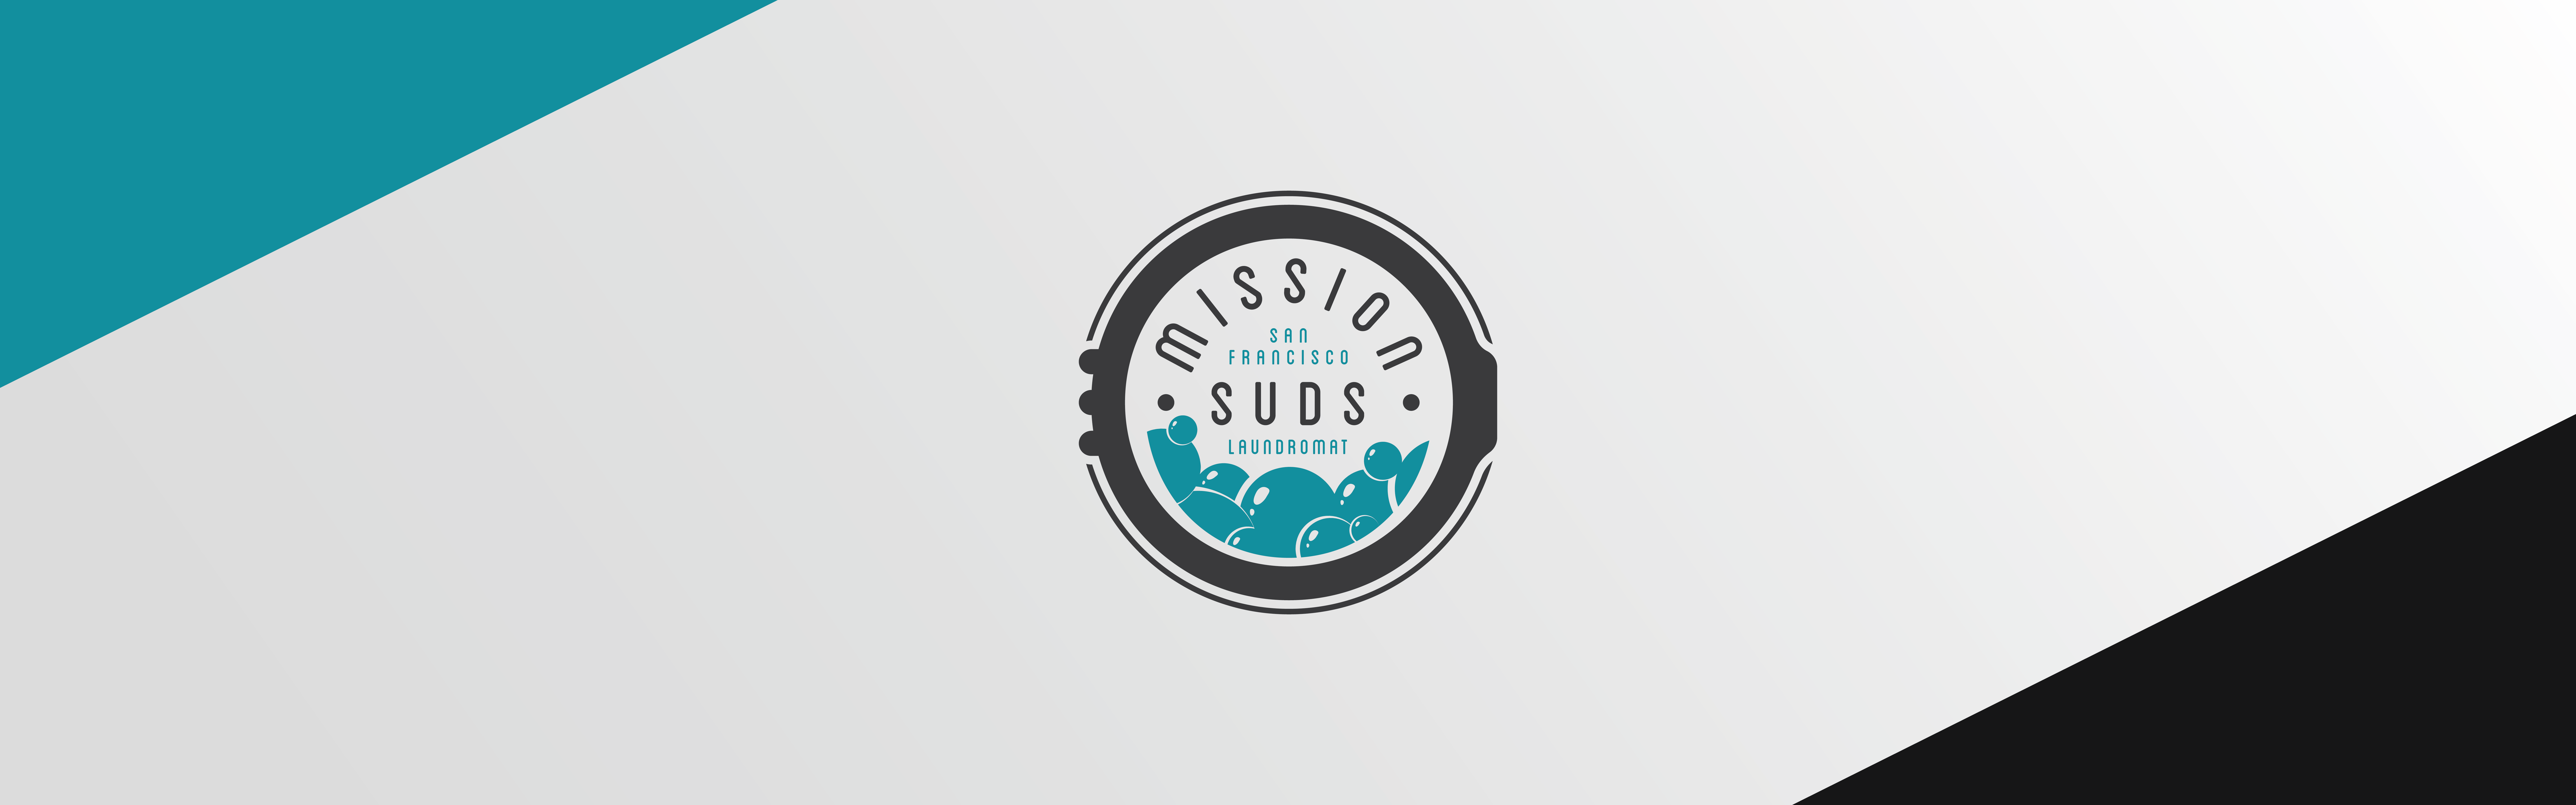 Oval-shaped logo with the text "Mission Suds" on a two-tone background divided diagonally between light blue and white.